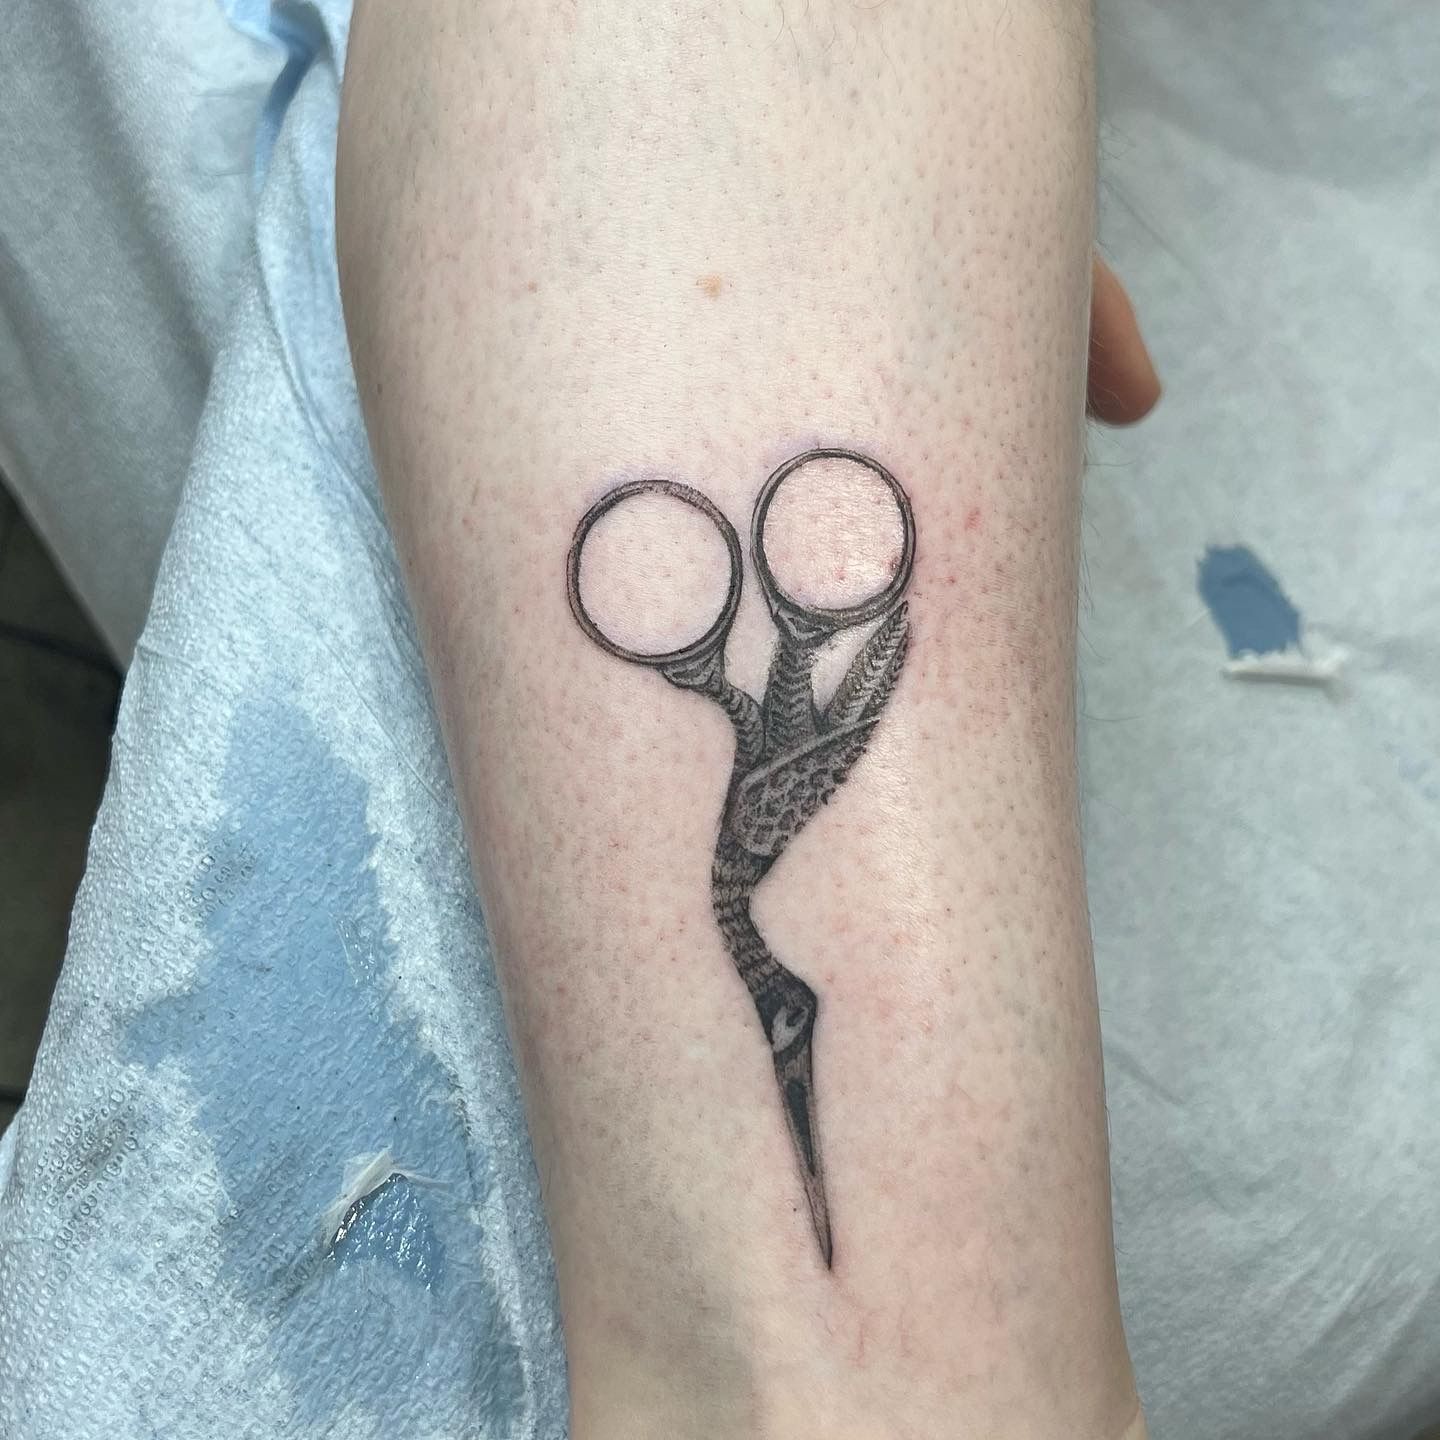 Comb and hairdressing scissors tattooed on the wrist.